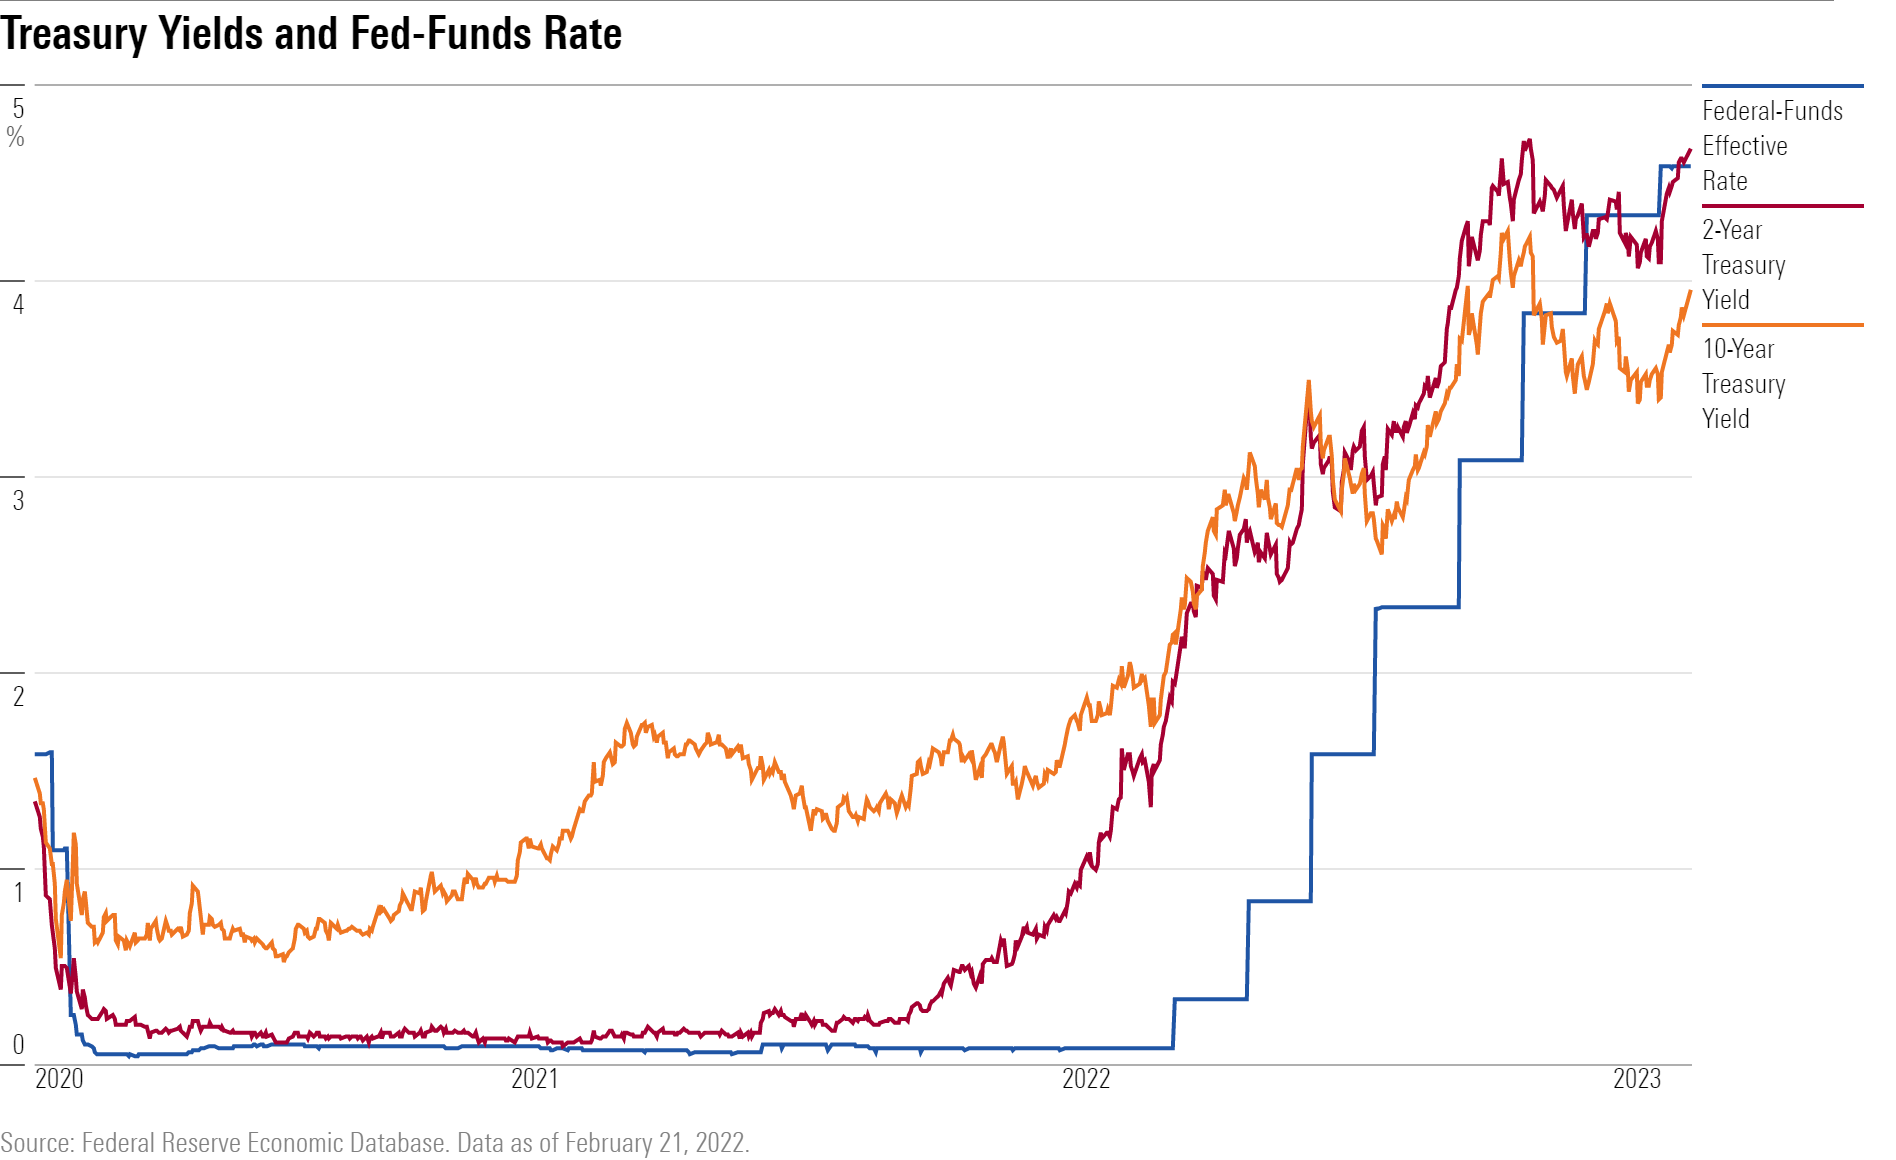 Federal-funds effective rate, 2-year treasury yield, and 10-year treasury yield.